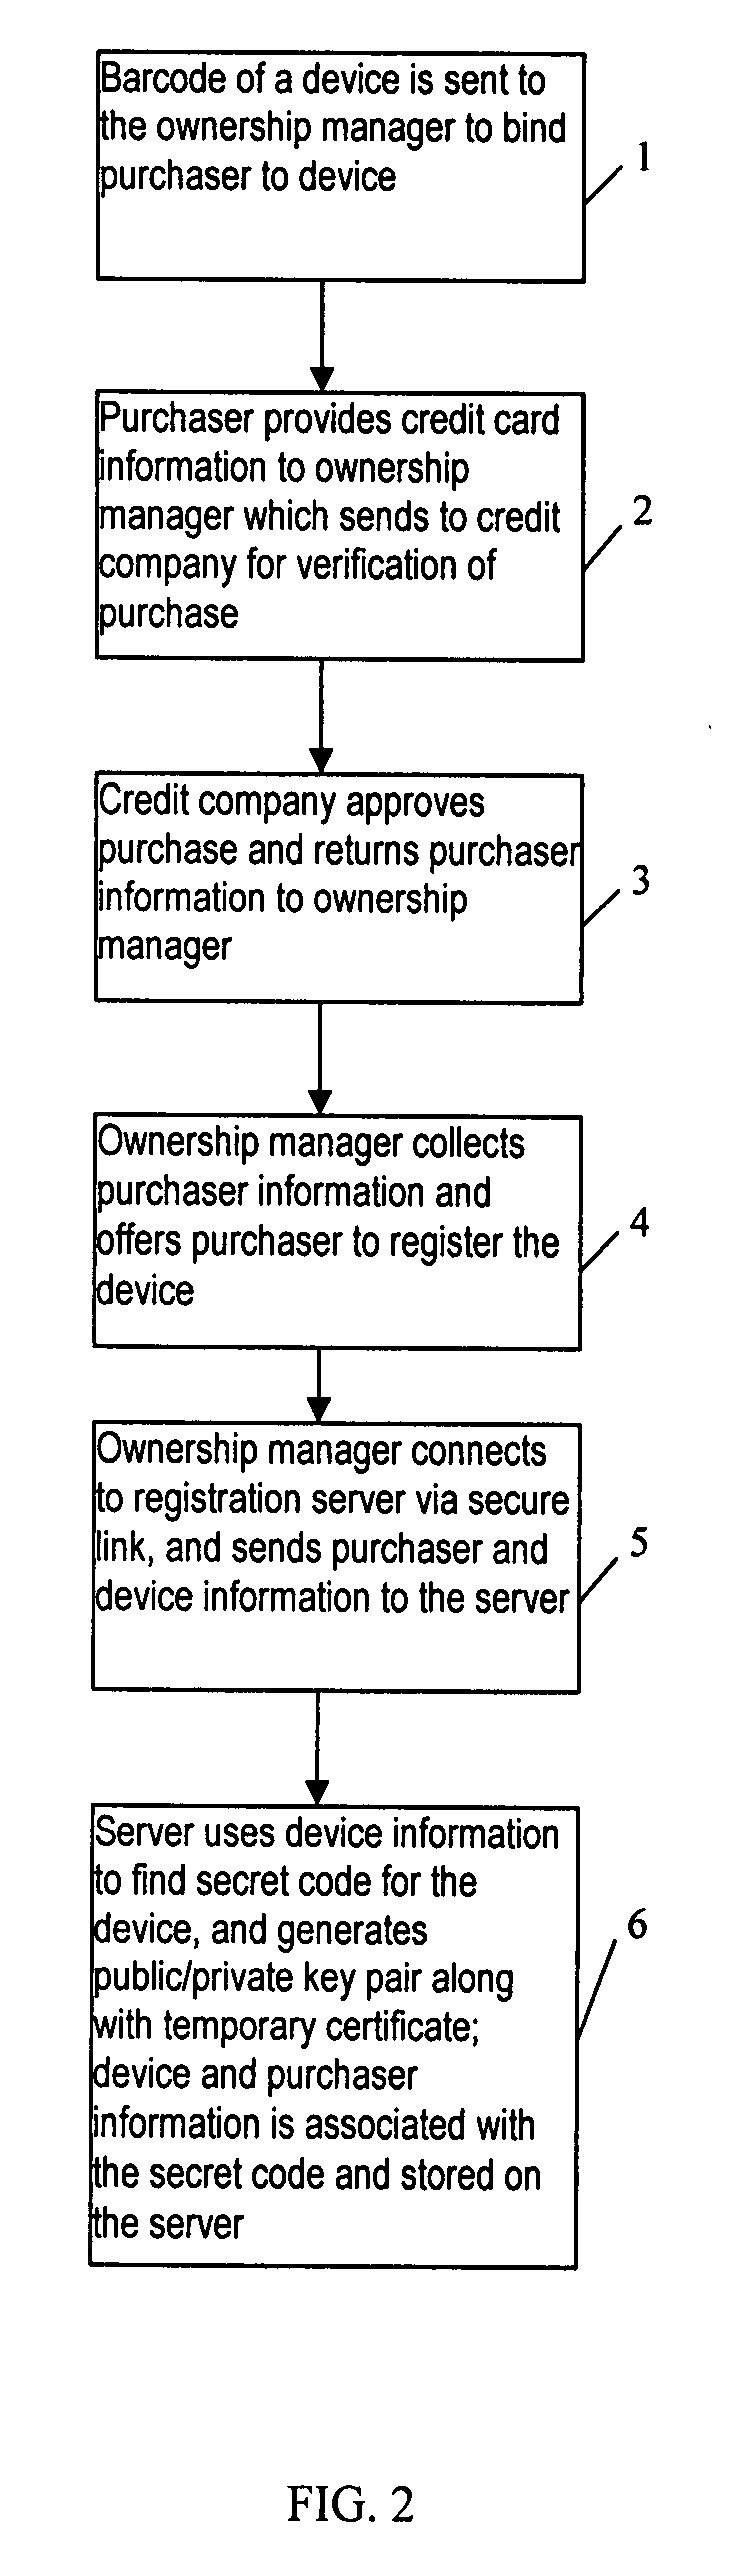 Method and system for authentication between electronic devices with minimal user intervention